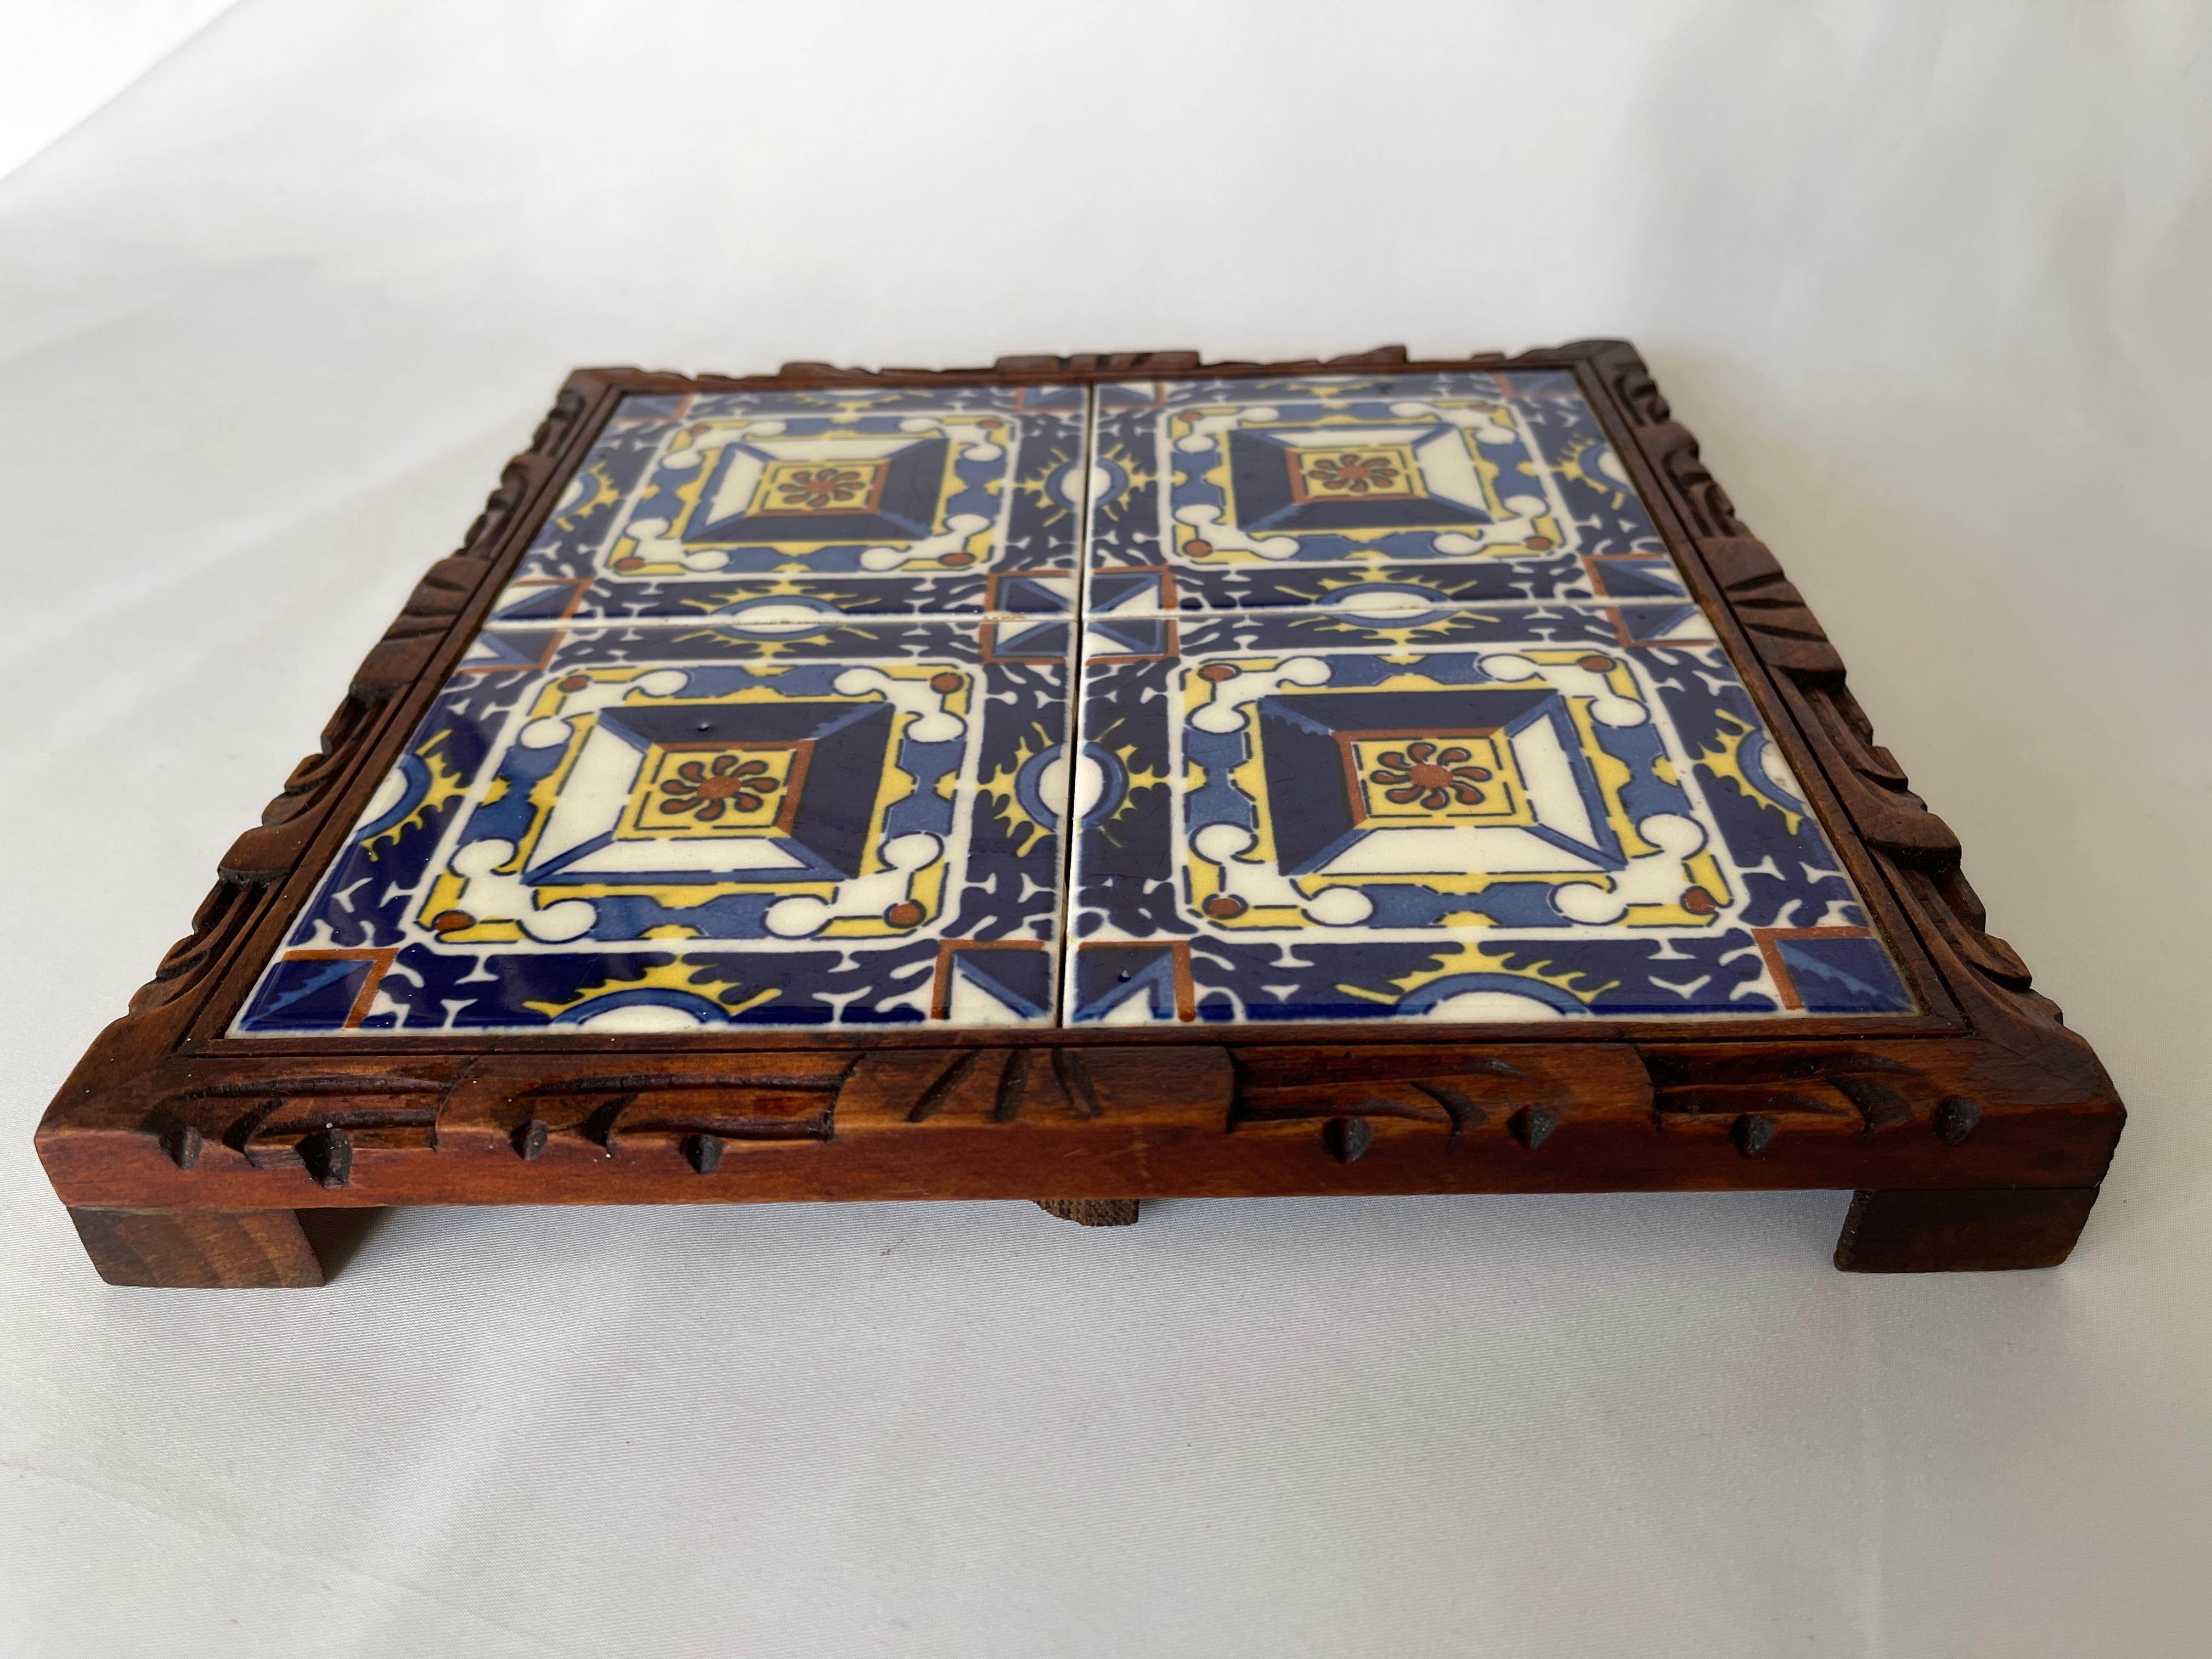 1950's Mexican tile square trivet tray with richly colored ceramic tile set in a hand carved wood framed footed base.